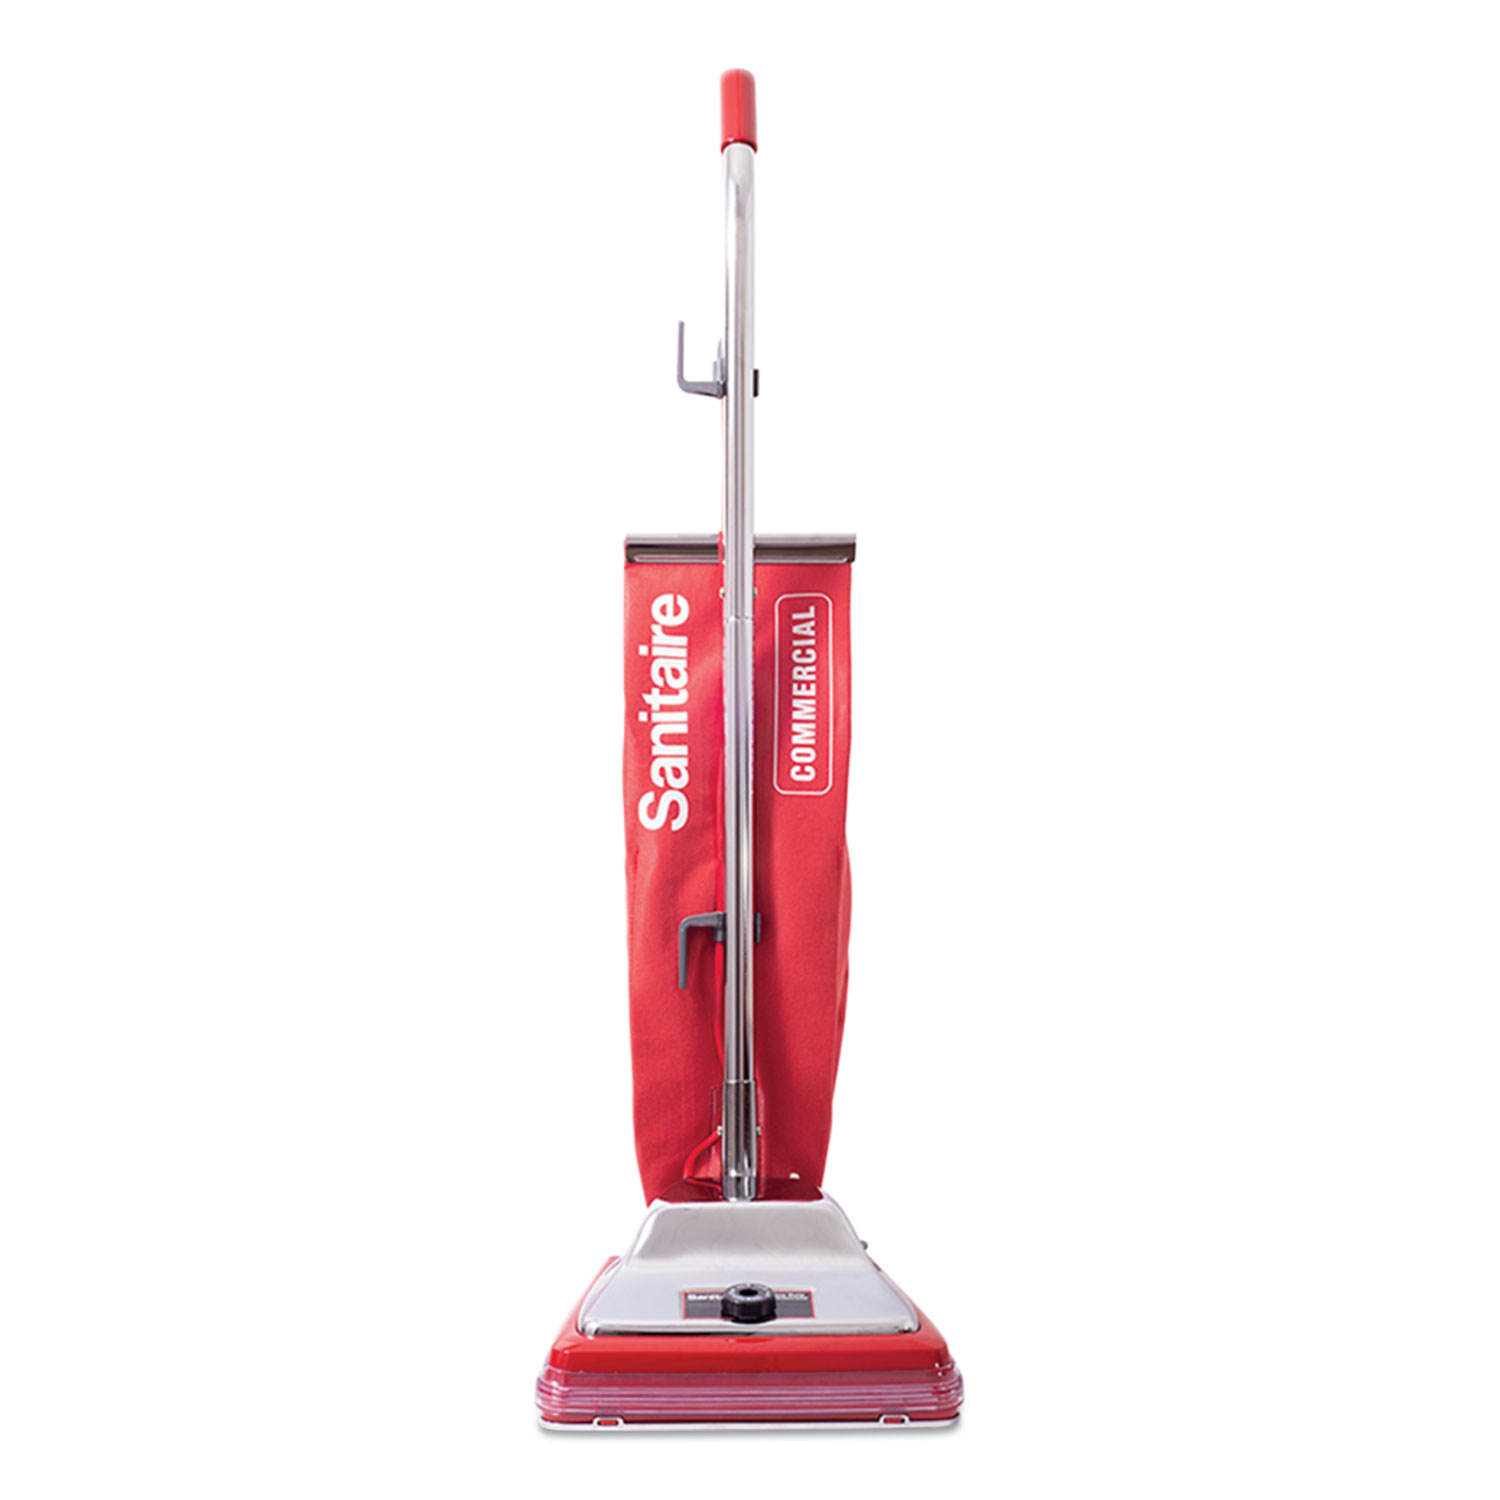  Sanitaire SC886E TRADITION Upright Vacuum with Shake-Out Bag, 17.5 lb, Red (EURSC886F) 